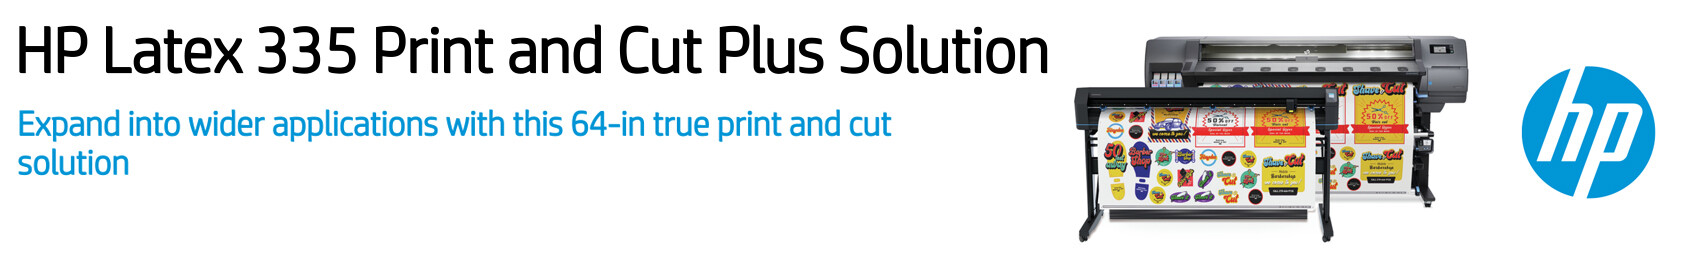 Hp Latex 335 64 Print And Cut Solution